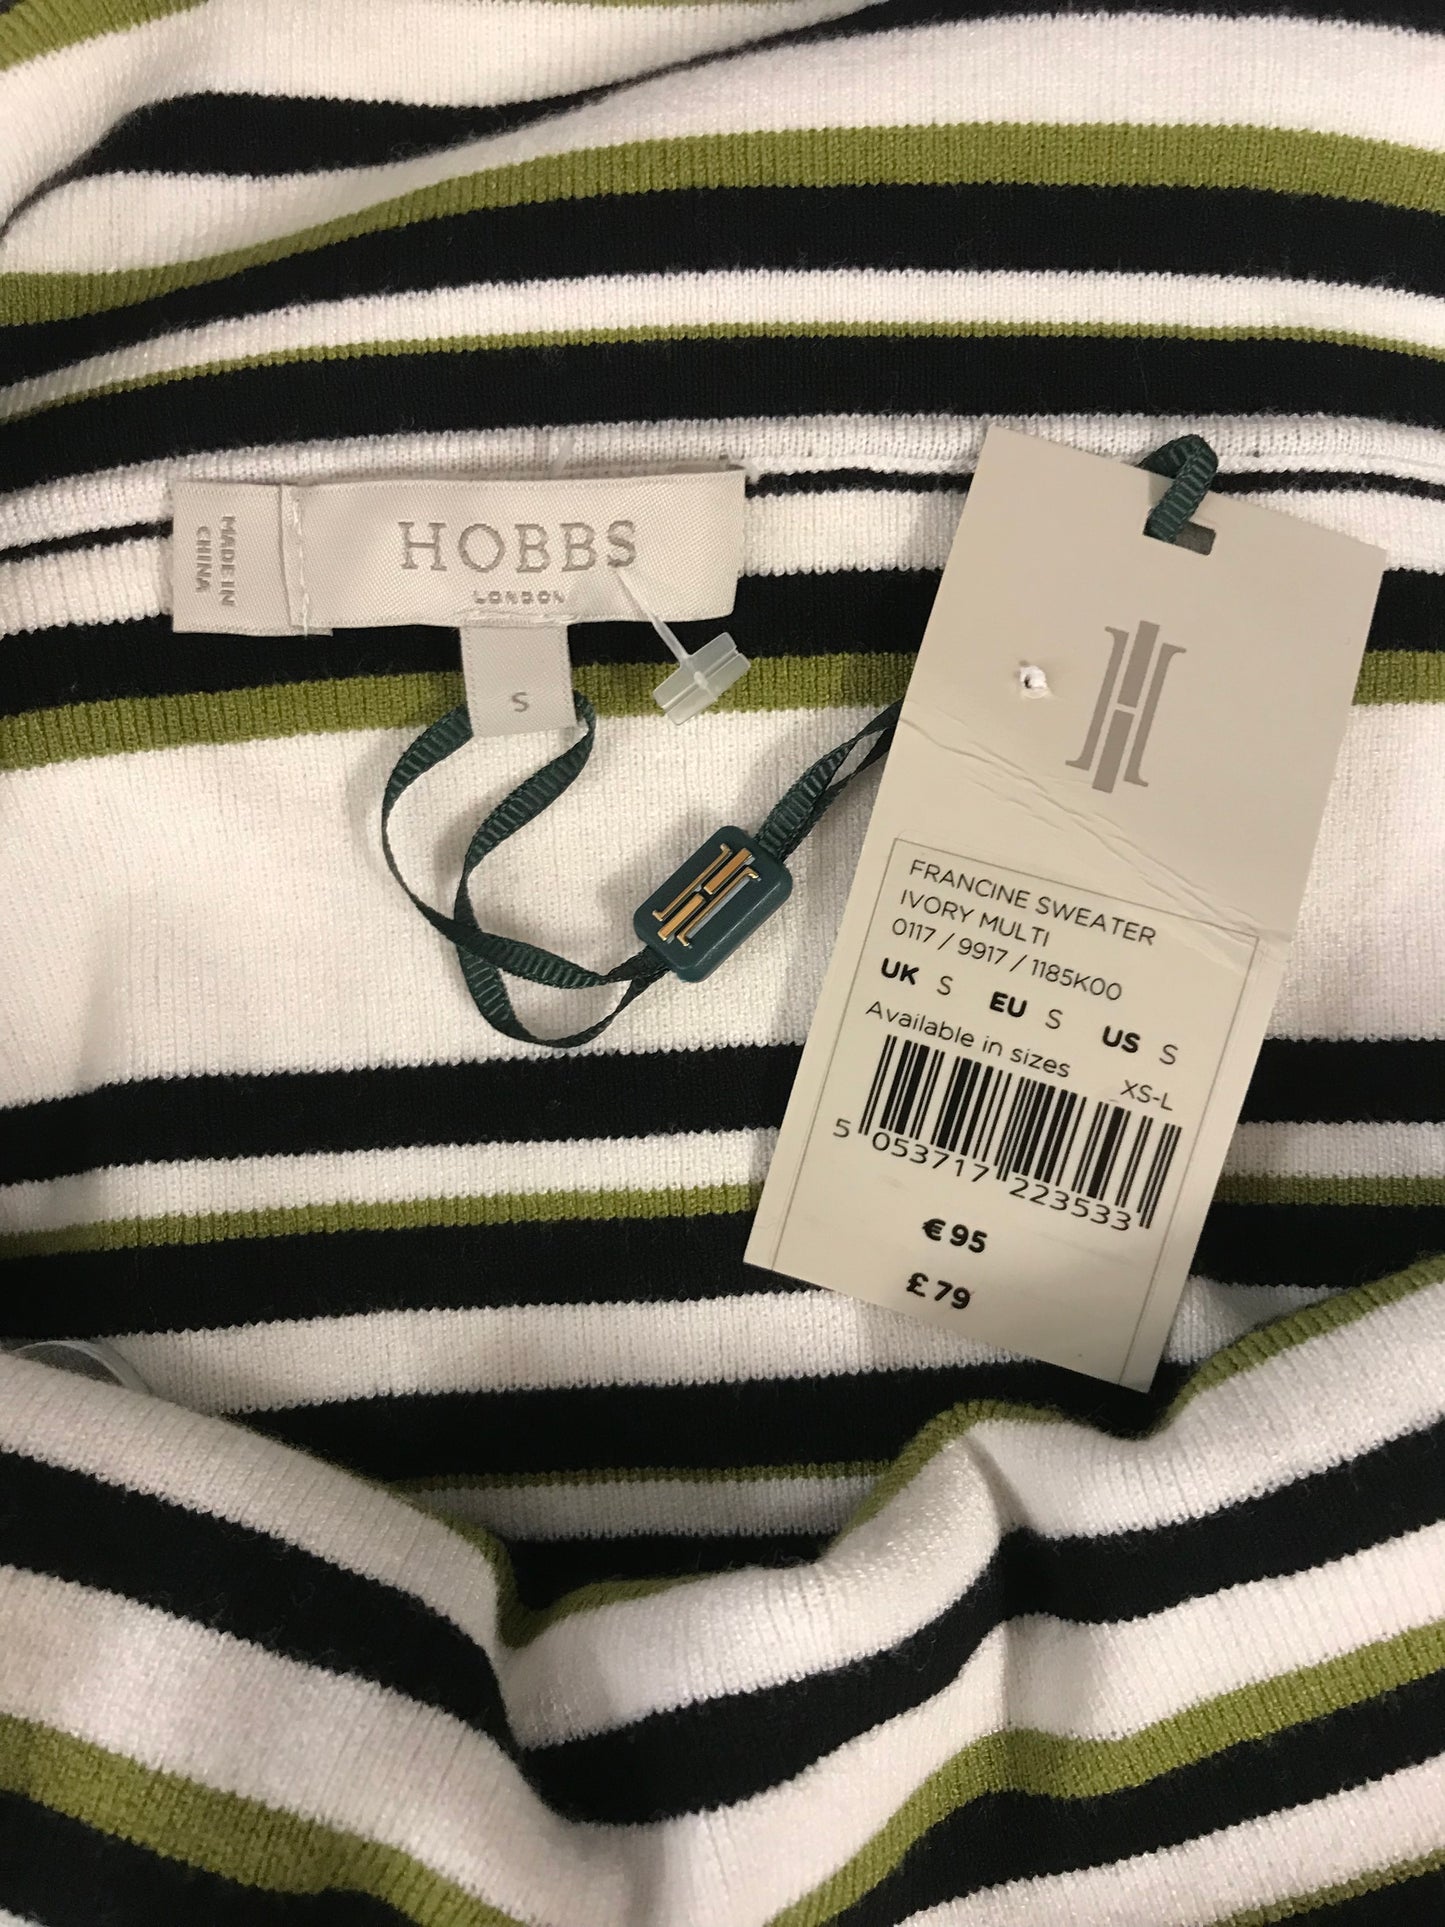 Hobbs BNWT Francine Sweater, Wide Necked Half Sleeved Green, Black and Ivory Size Small/10 RRP £79